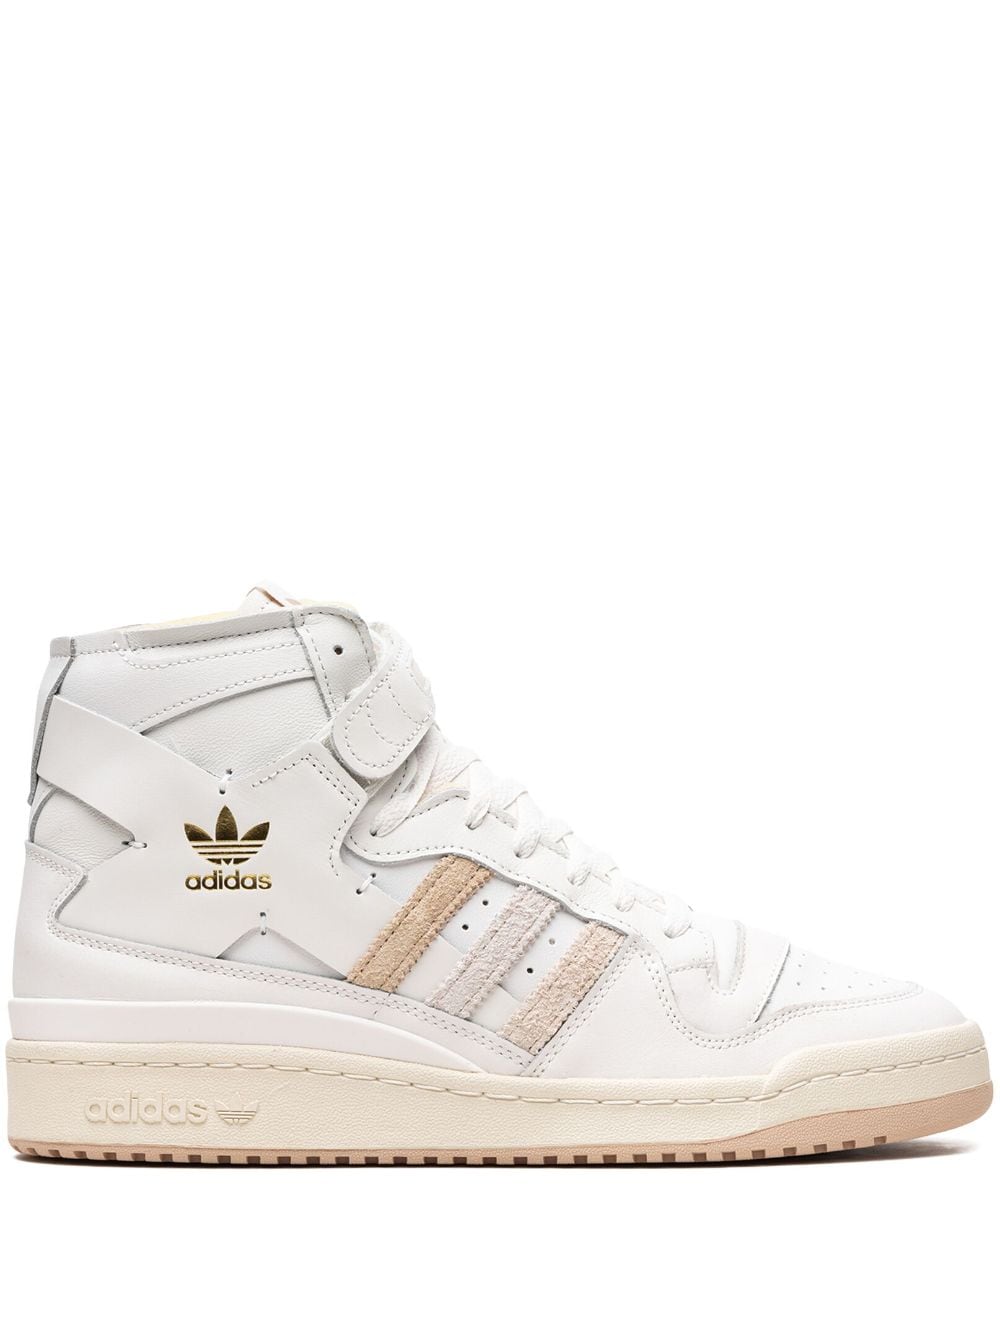 Adidas Originals Perforated Leather High-top Sneakers In White